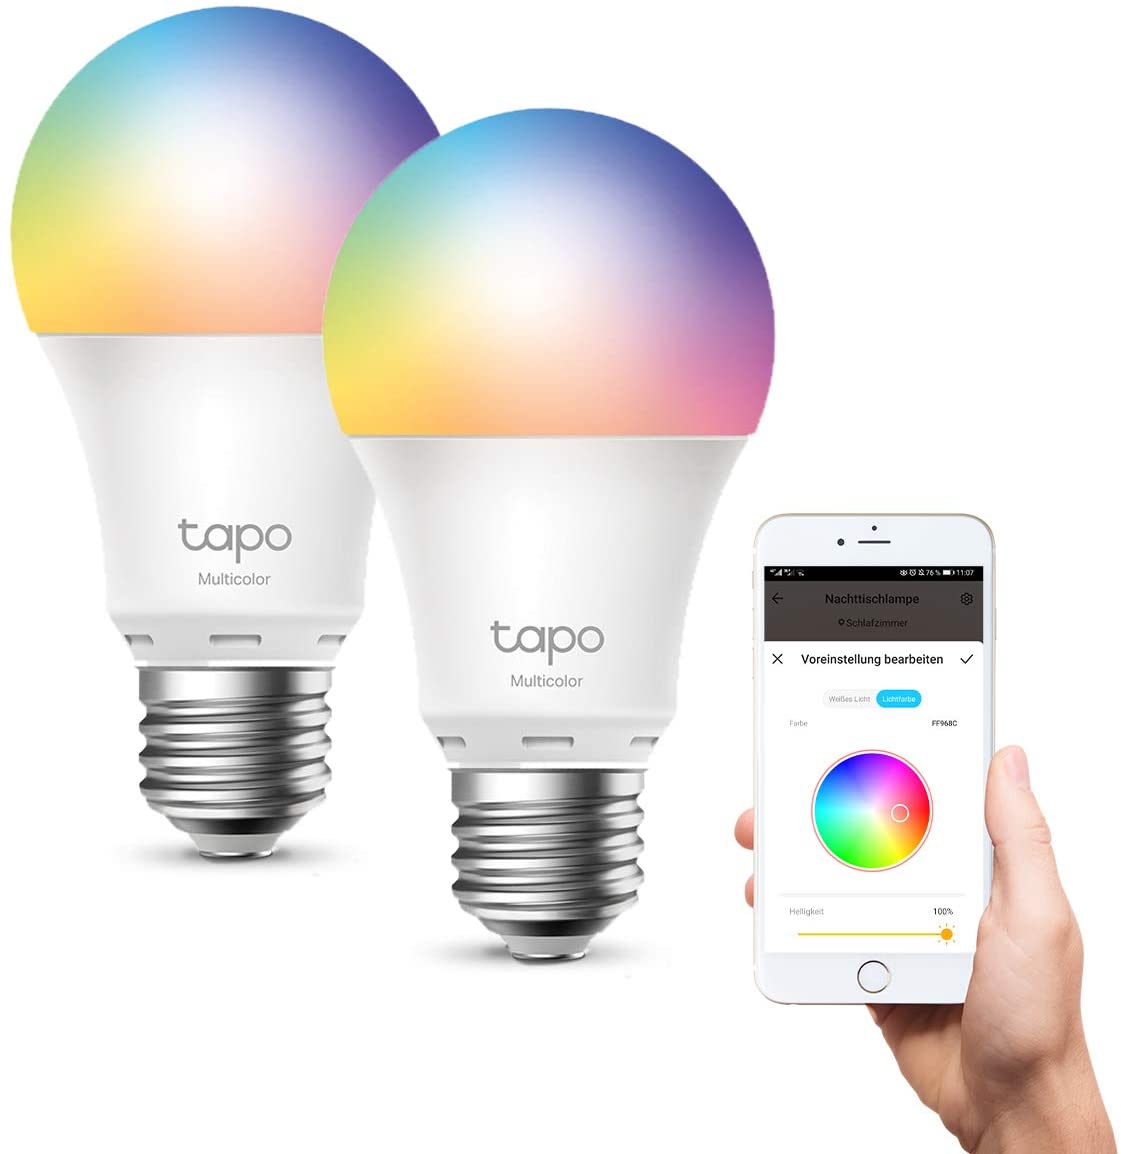 TP-Link Tapo smarthome E27 light multi color bulb, compatible with alexa, google assistant, tapo app, energy saving, no hub needed (2 pack)